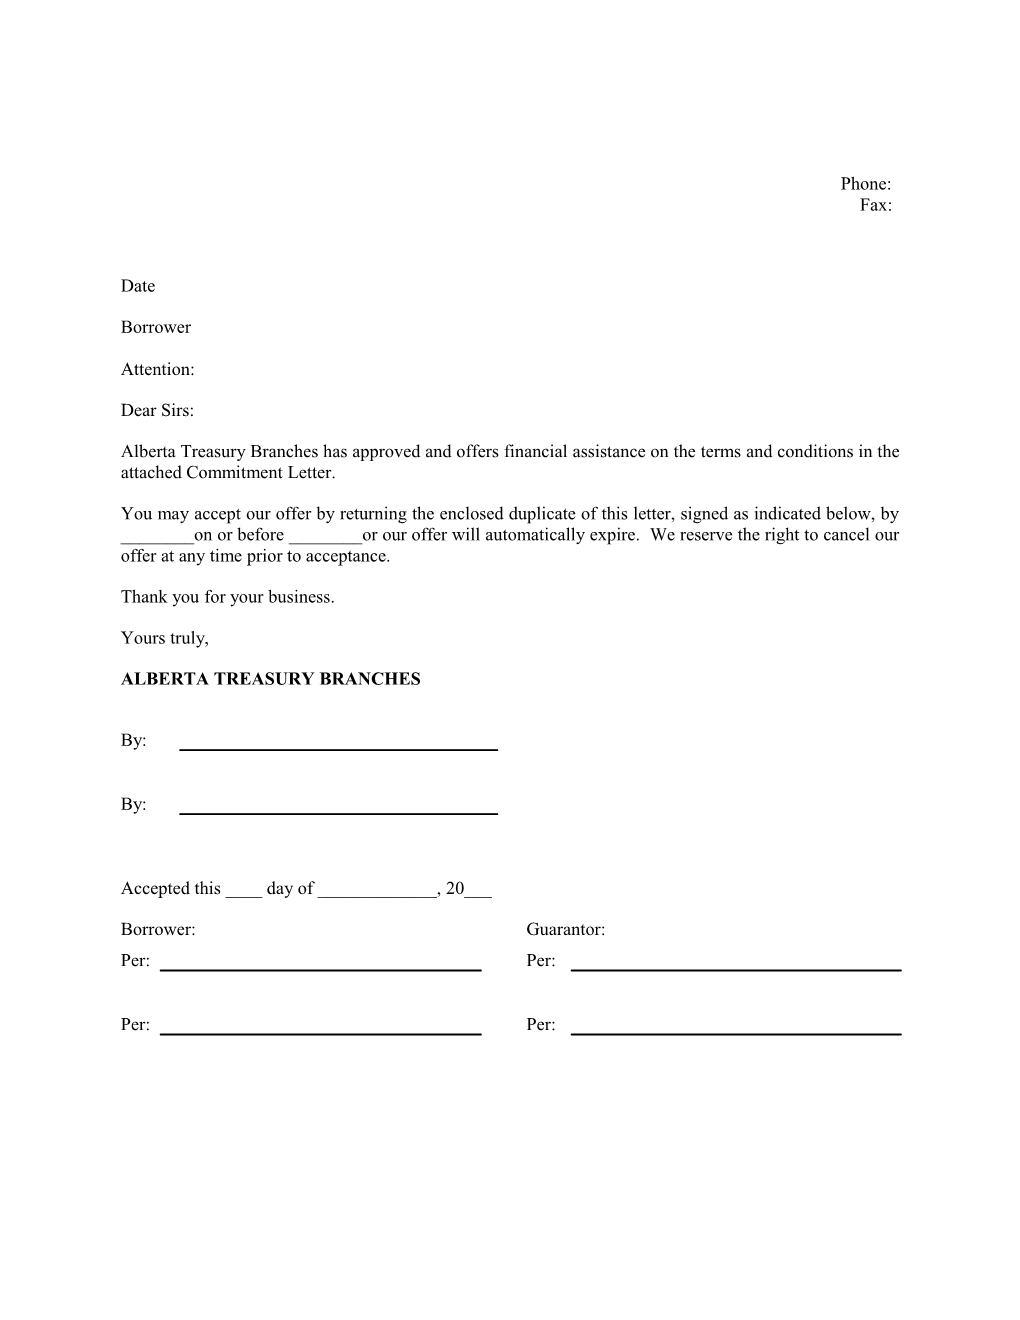 7519 - Commitment Letter - Commercial Mortgage - Fixed Rate